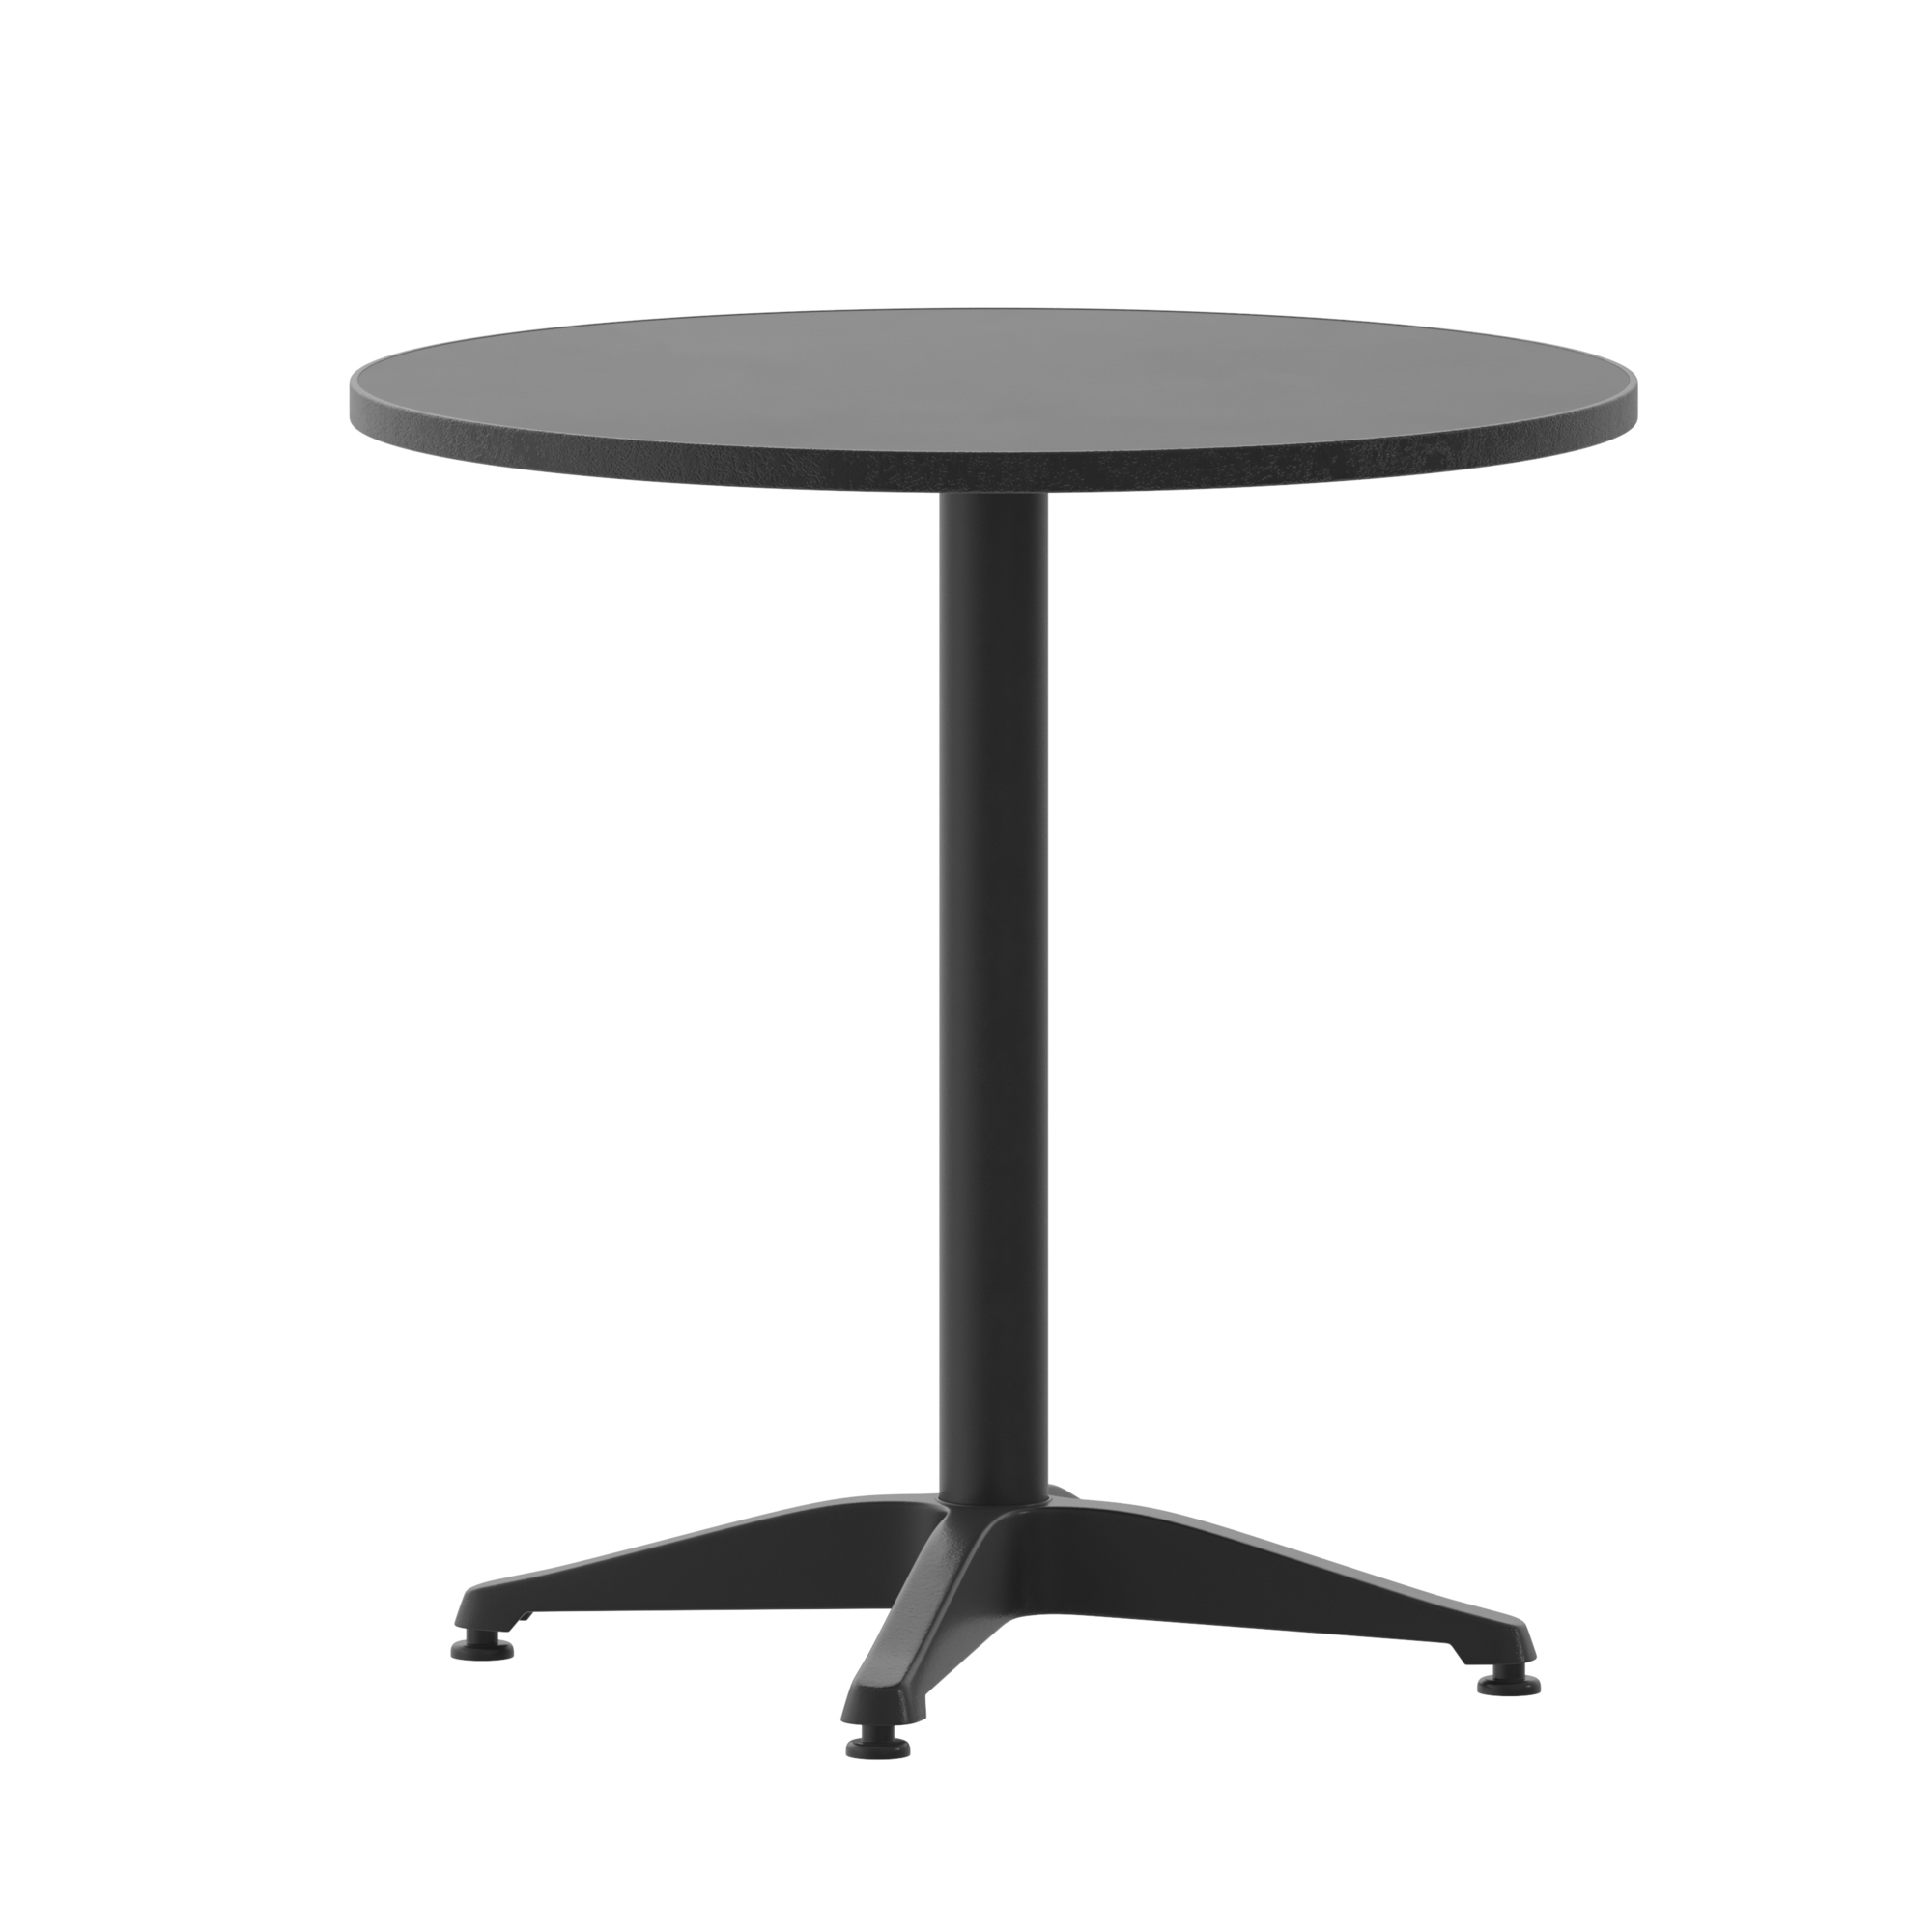 Flash Furniture, 27.5RD Black Metal Indoor-Outdoor Table w/ Base, Table Shape Round, Primary Color Black, Height 27.5 in, Model TLH0522BK